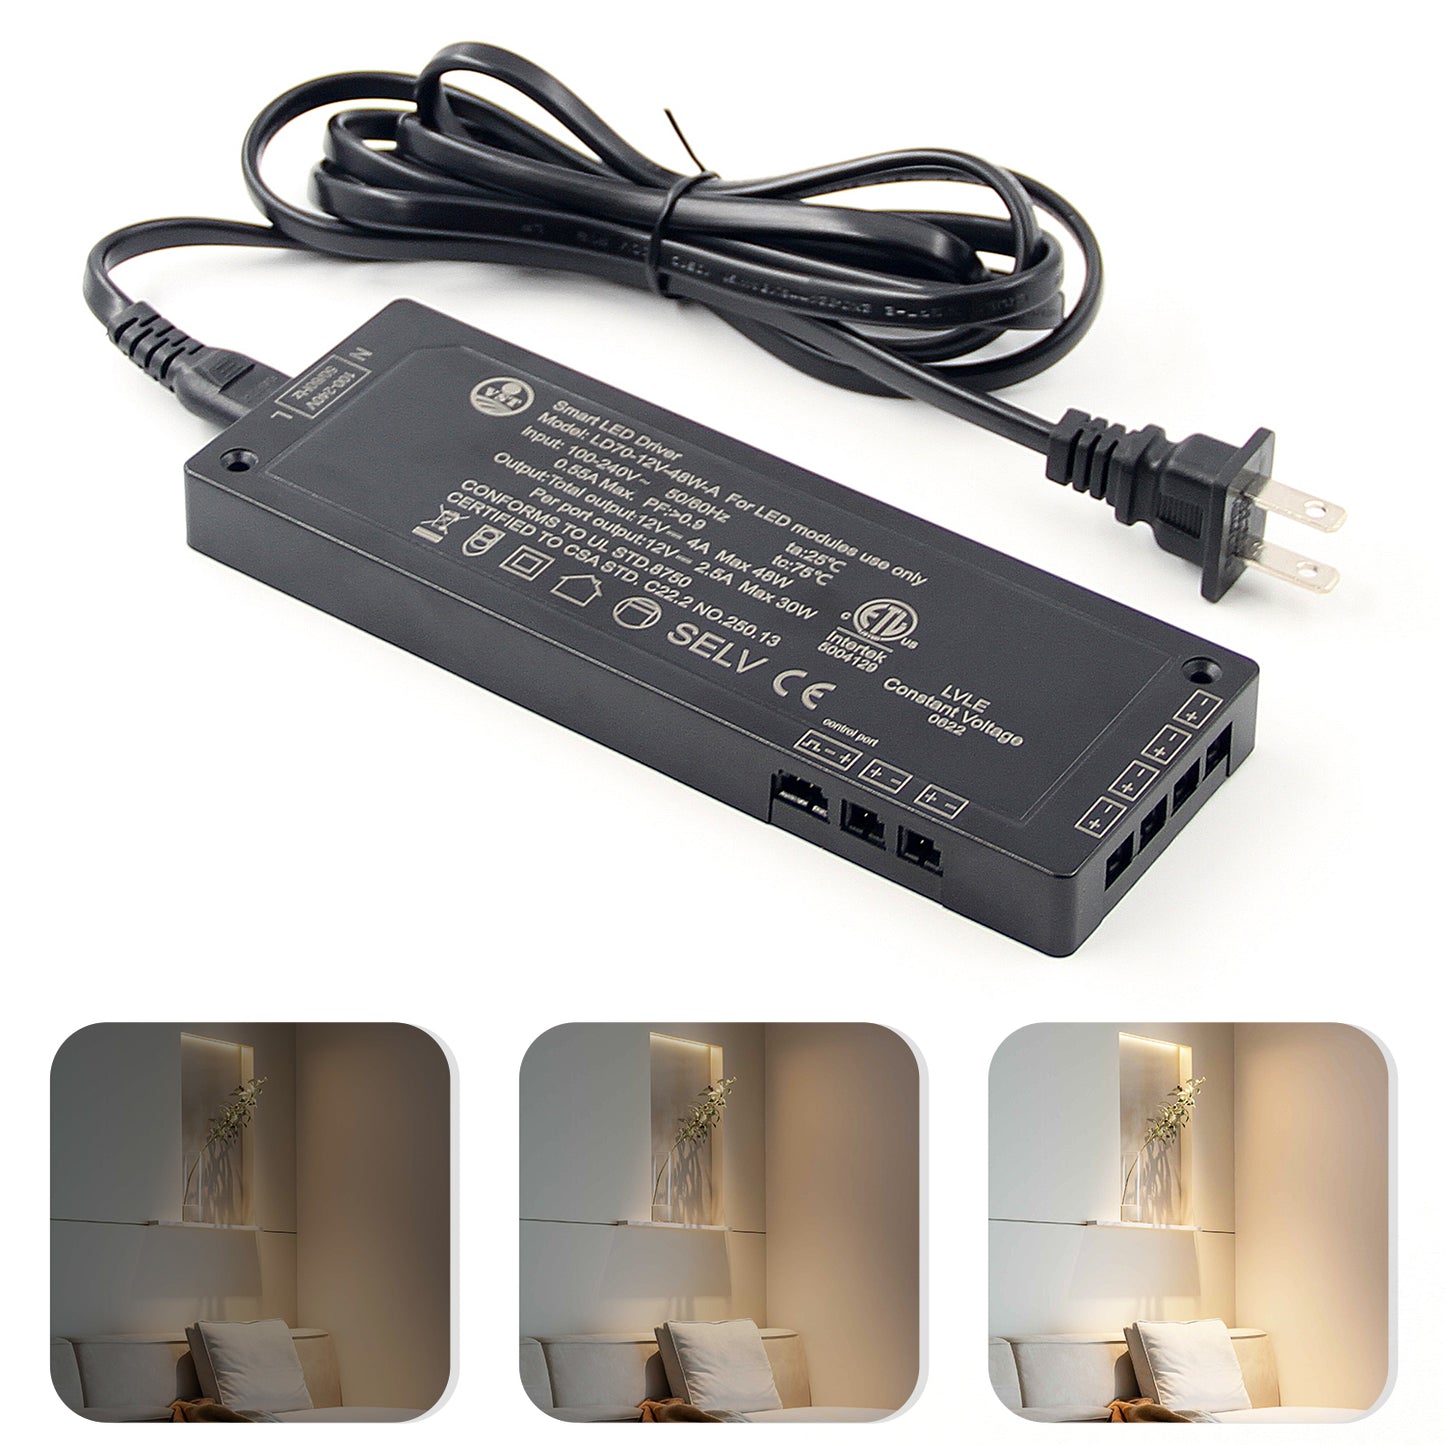 LD70 -12V Constant Current LED Power Supply 60W Ultra-thin Strip Light Transformer with ETL for Indoor Illumination System 170*60*16mm